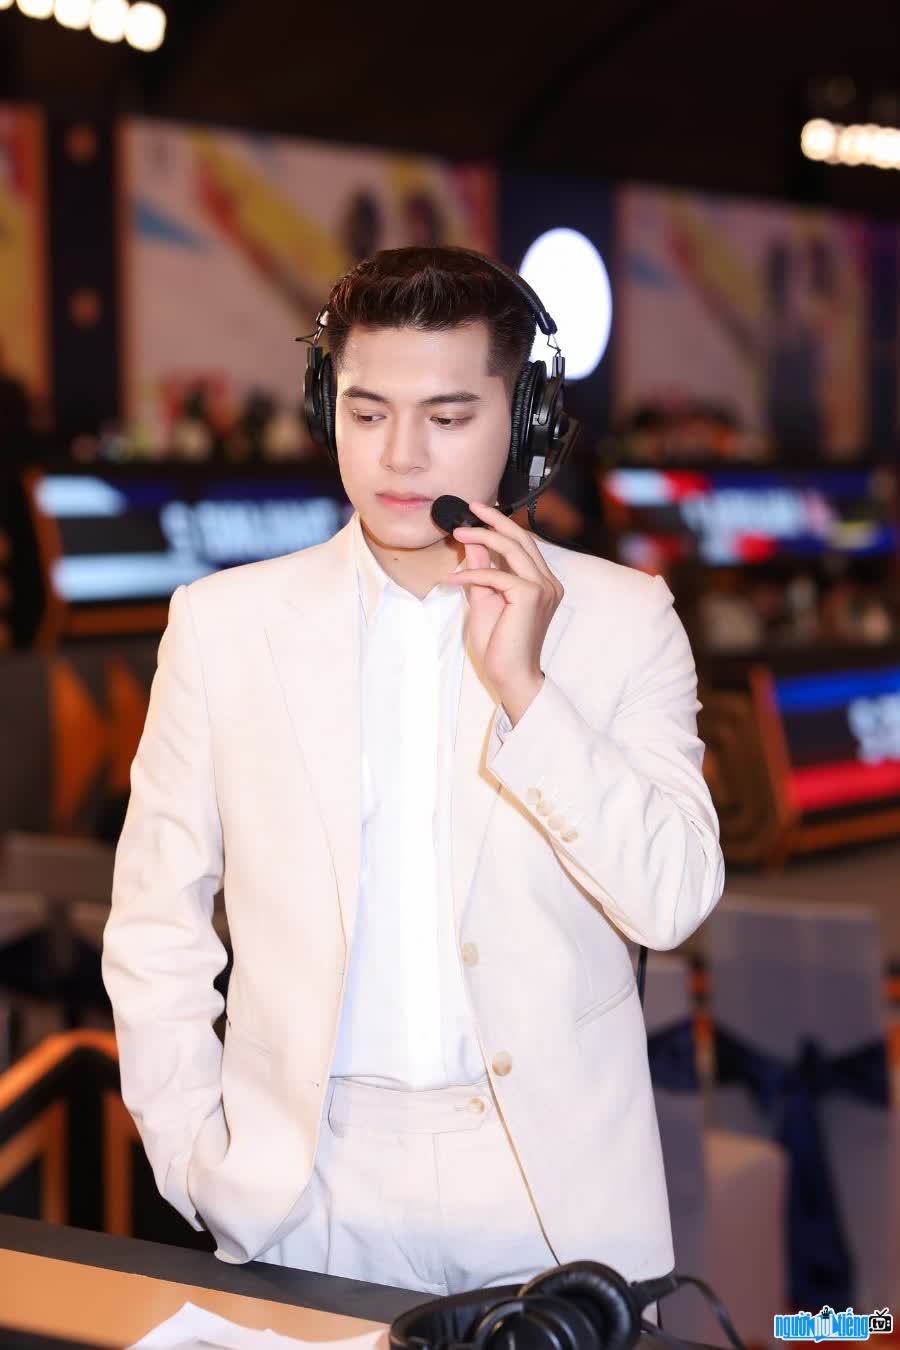 Caster Tuan Tai used to have Caster/Analyst experience for many tournaments